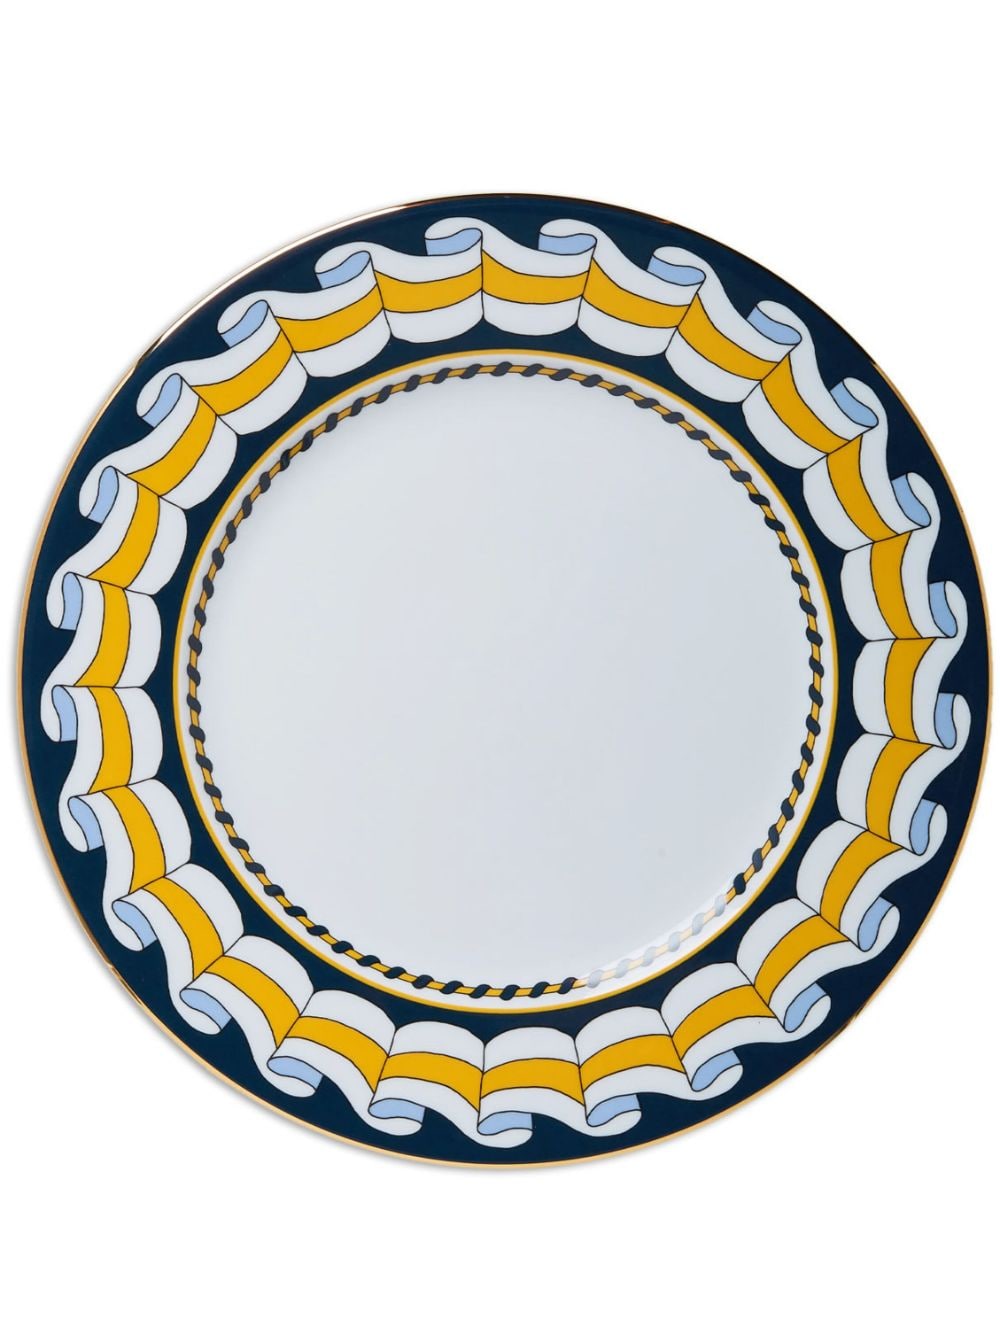 La Doublej Patterned Porcelain Charger Plate In White